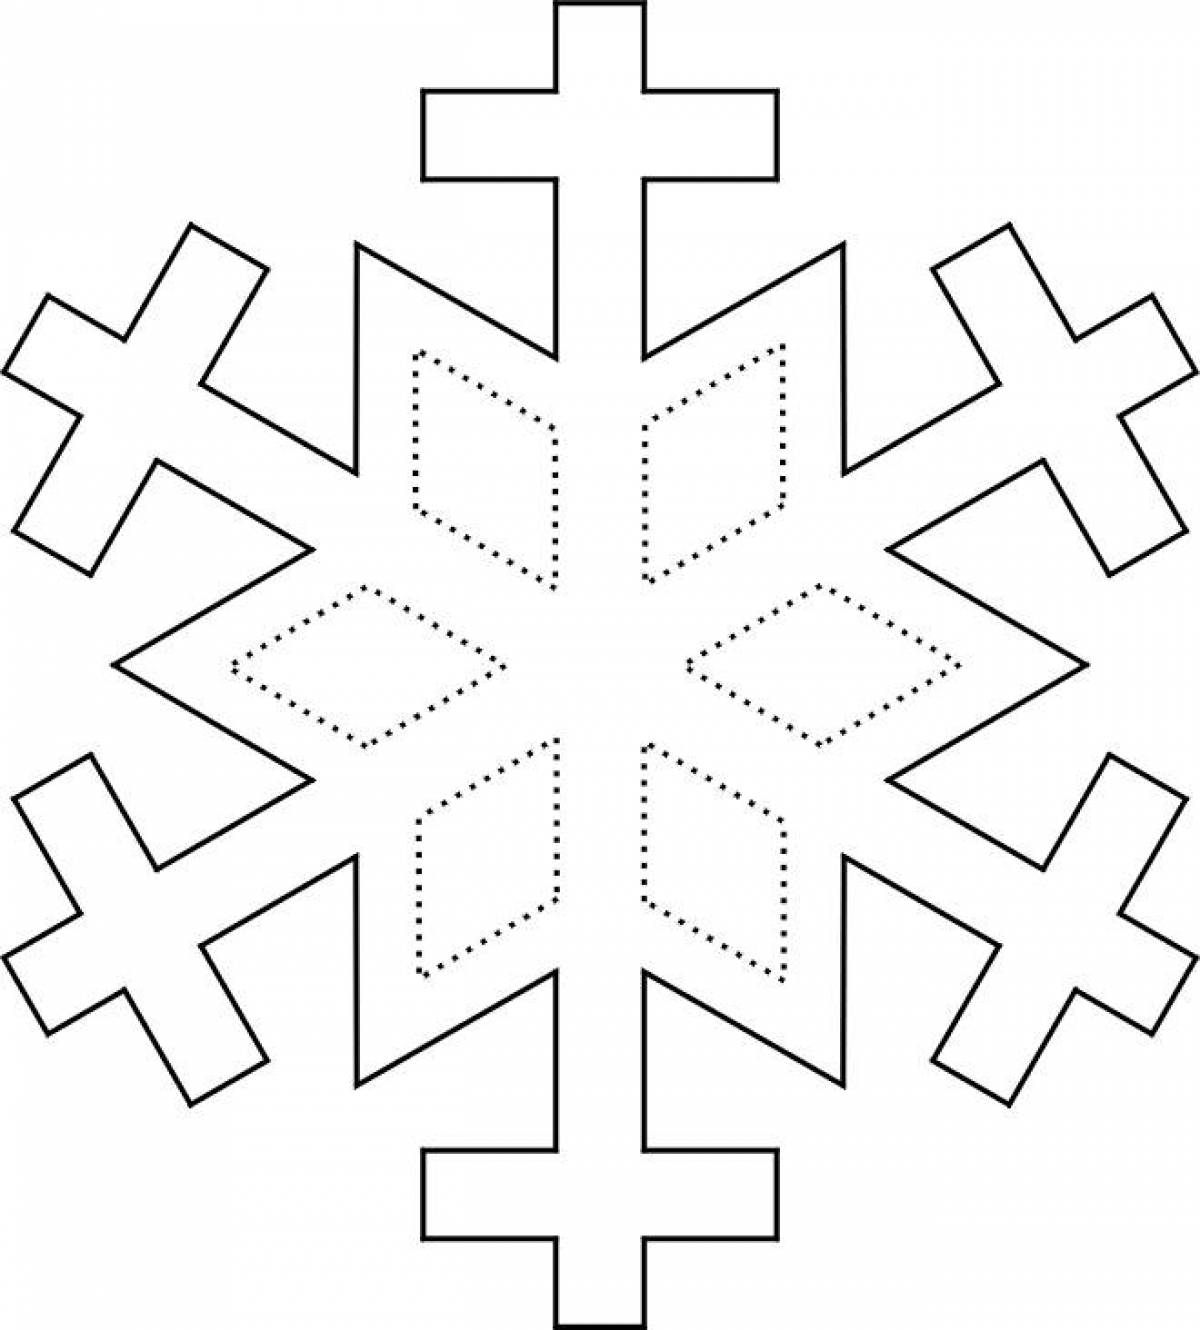 Magic snowflake coloring book for kids 5-6 years old